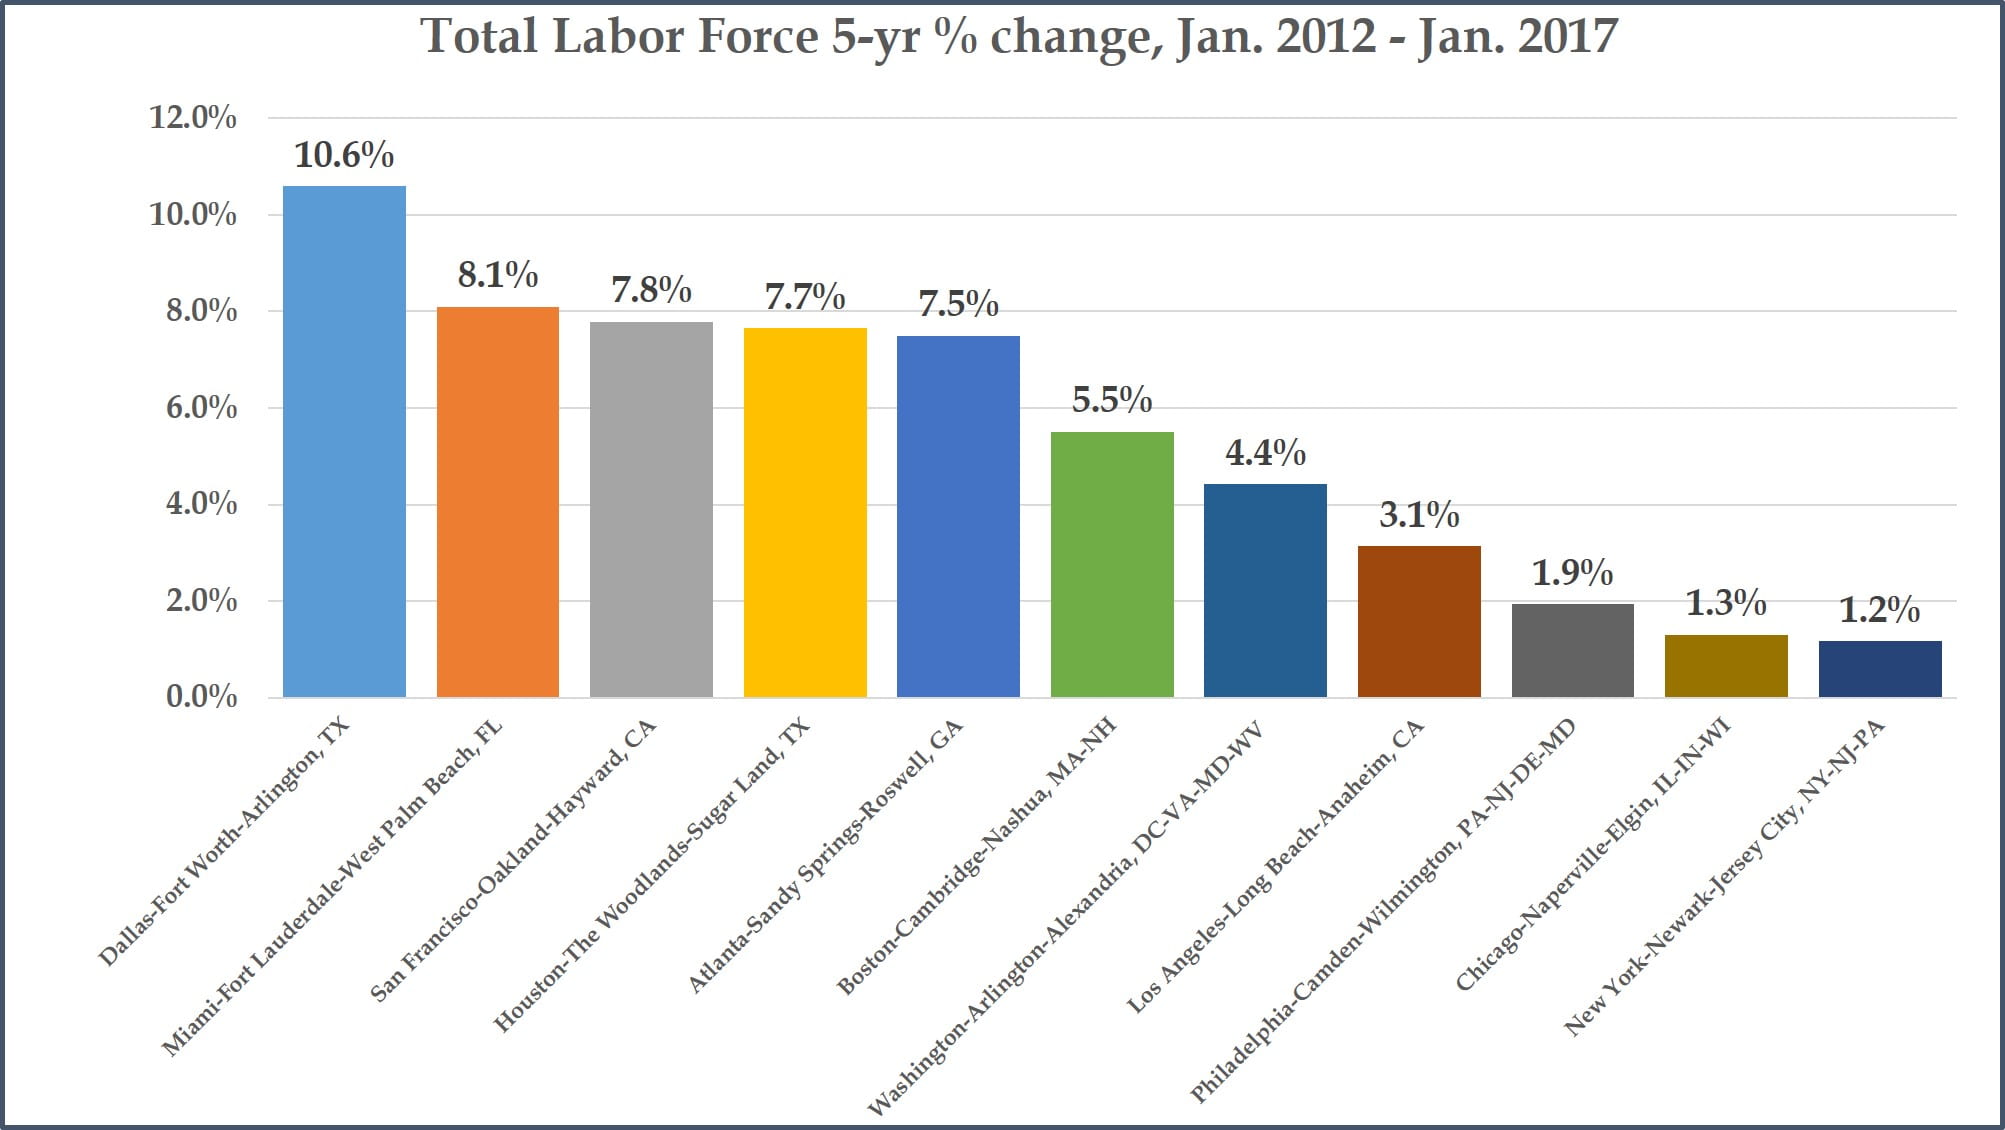 Total Labor Force - 5-year changes - Top Metros